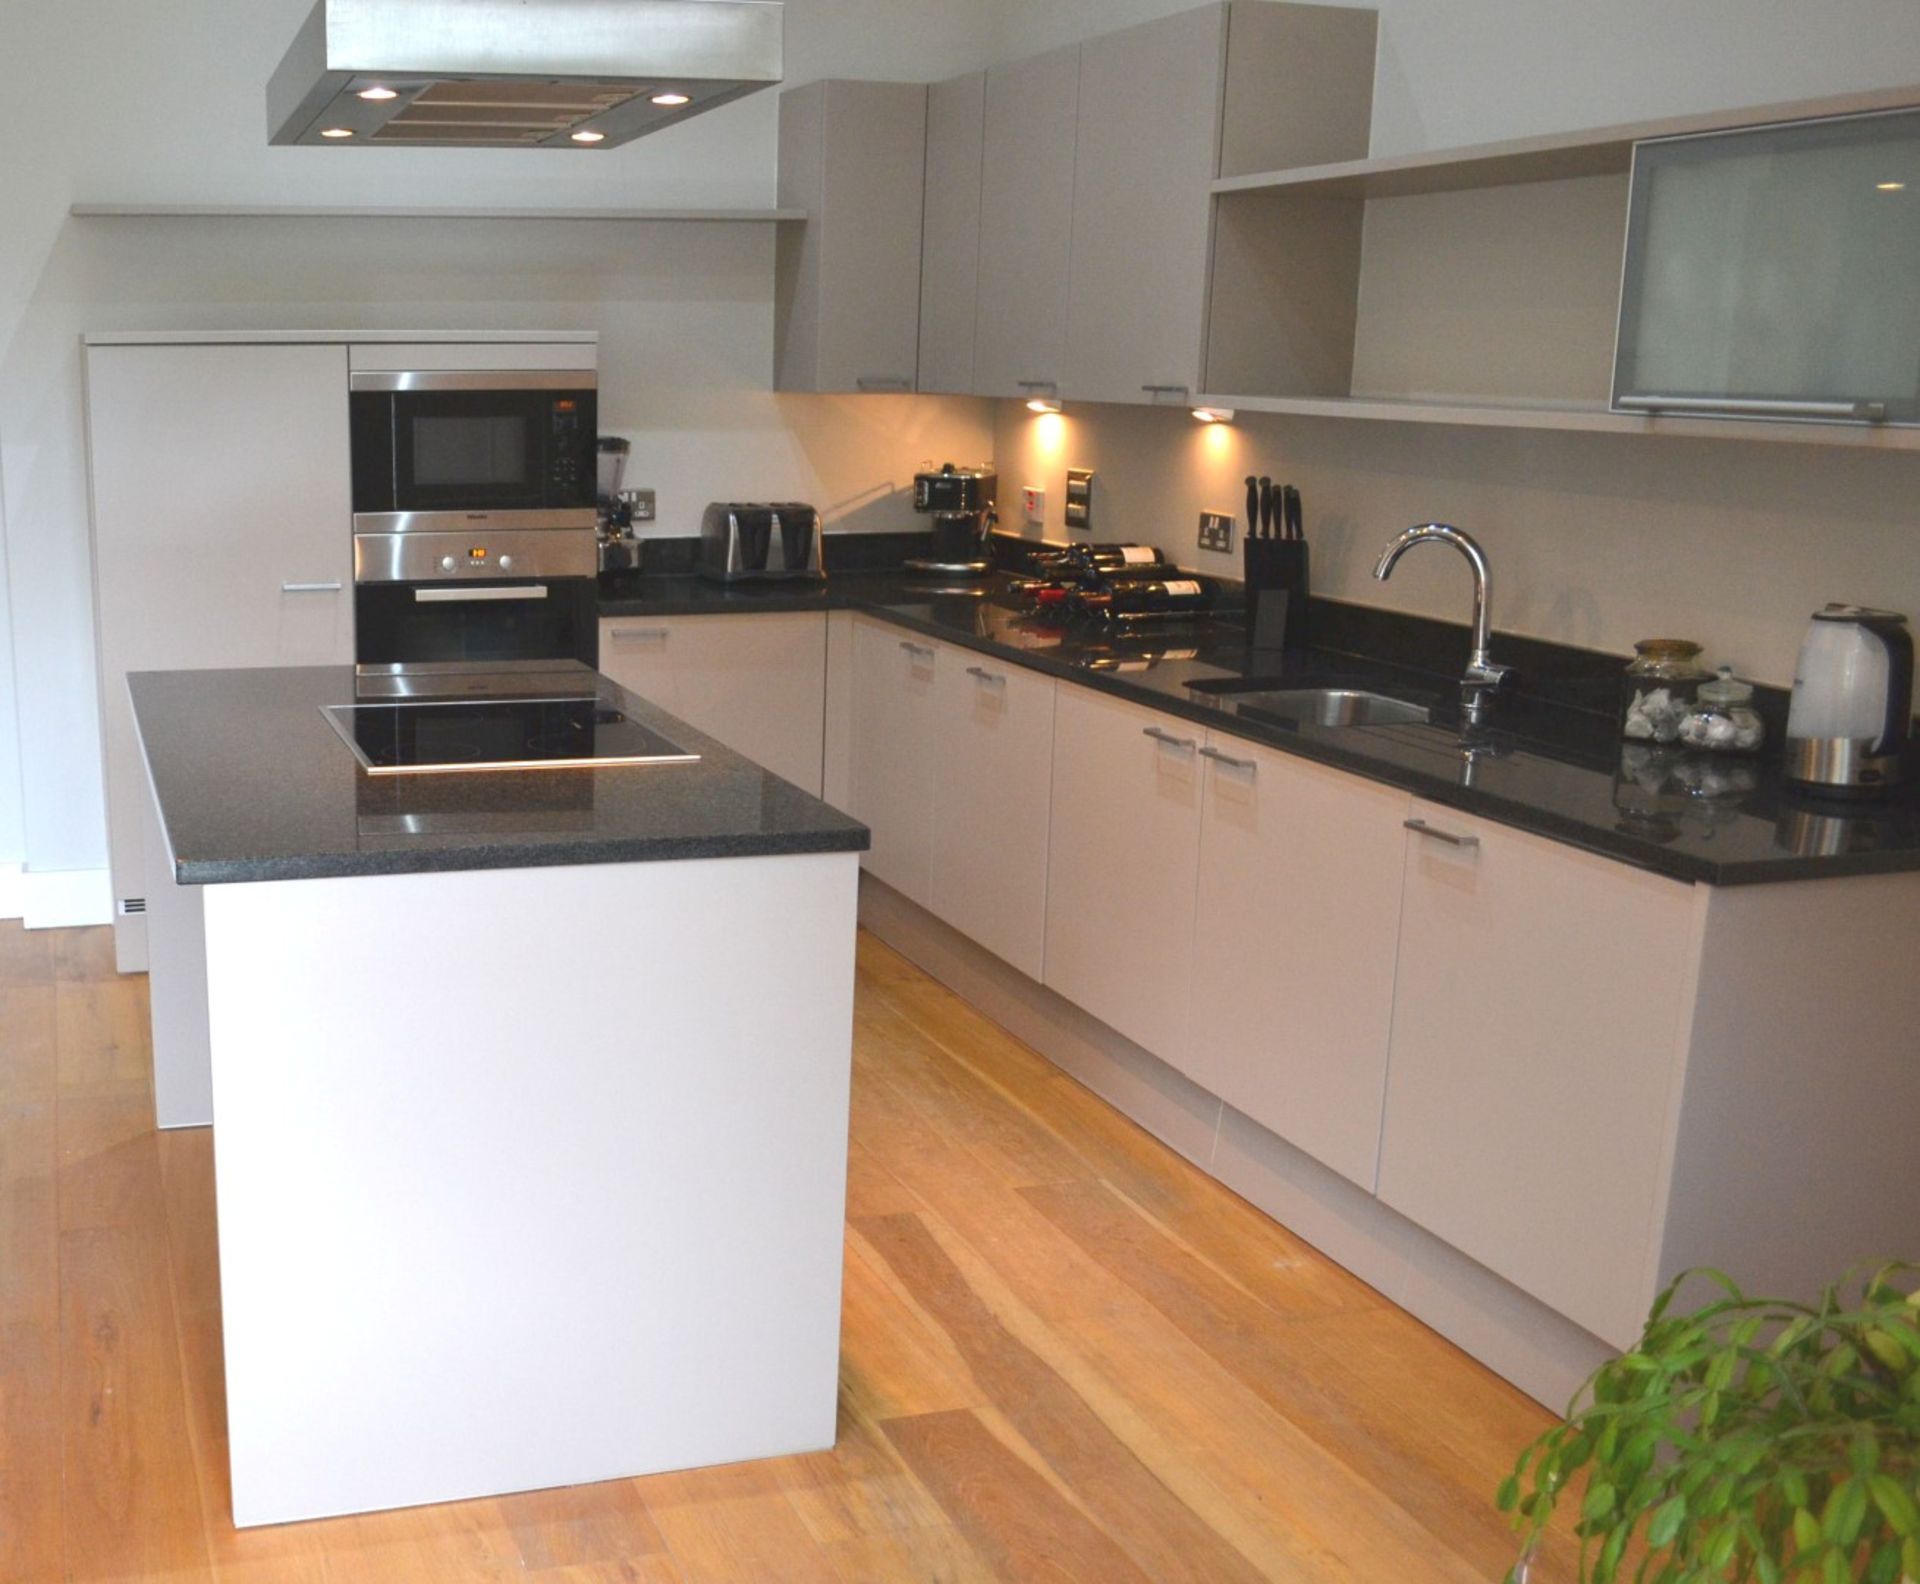 1 x Stunning Poggenpohl Kitchen With Black Granite Worktops and Miele and Siemens Appliances - In - Image 18 of 67